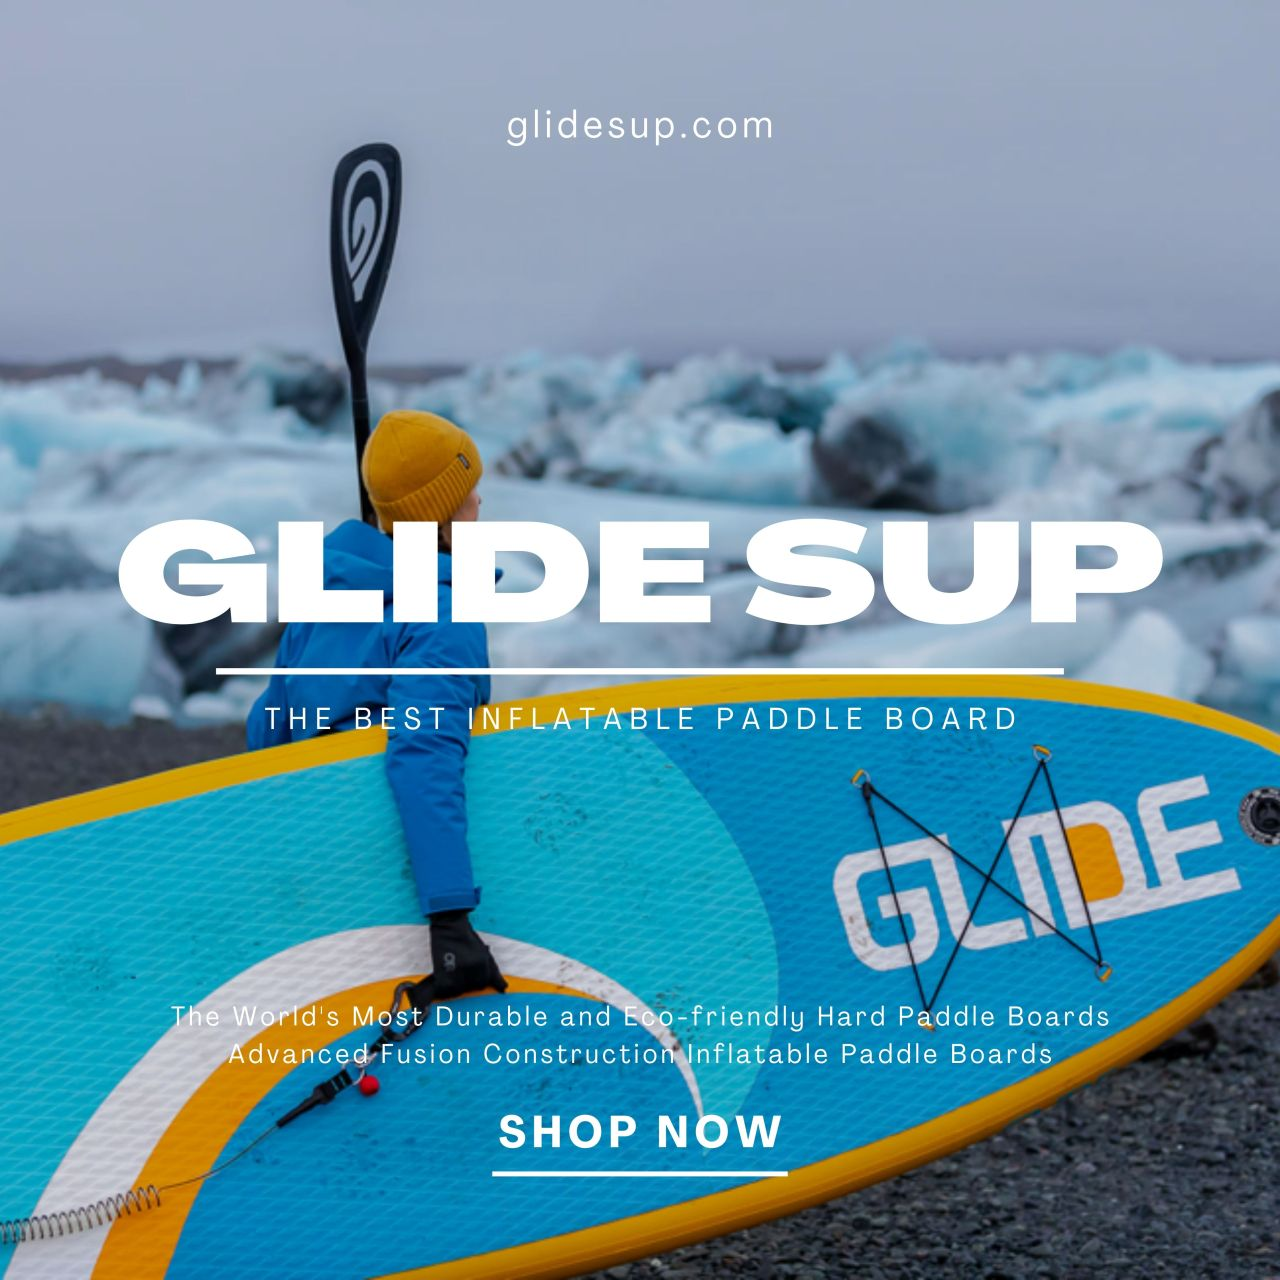 Experienced paddlers, advanced paddlers and new paddlers will love the best inflatable paddle boards on the market.